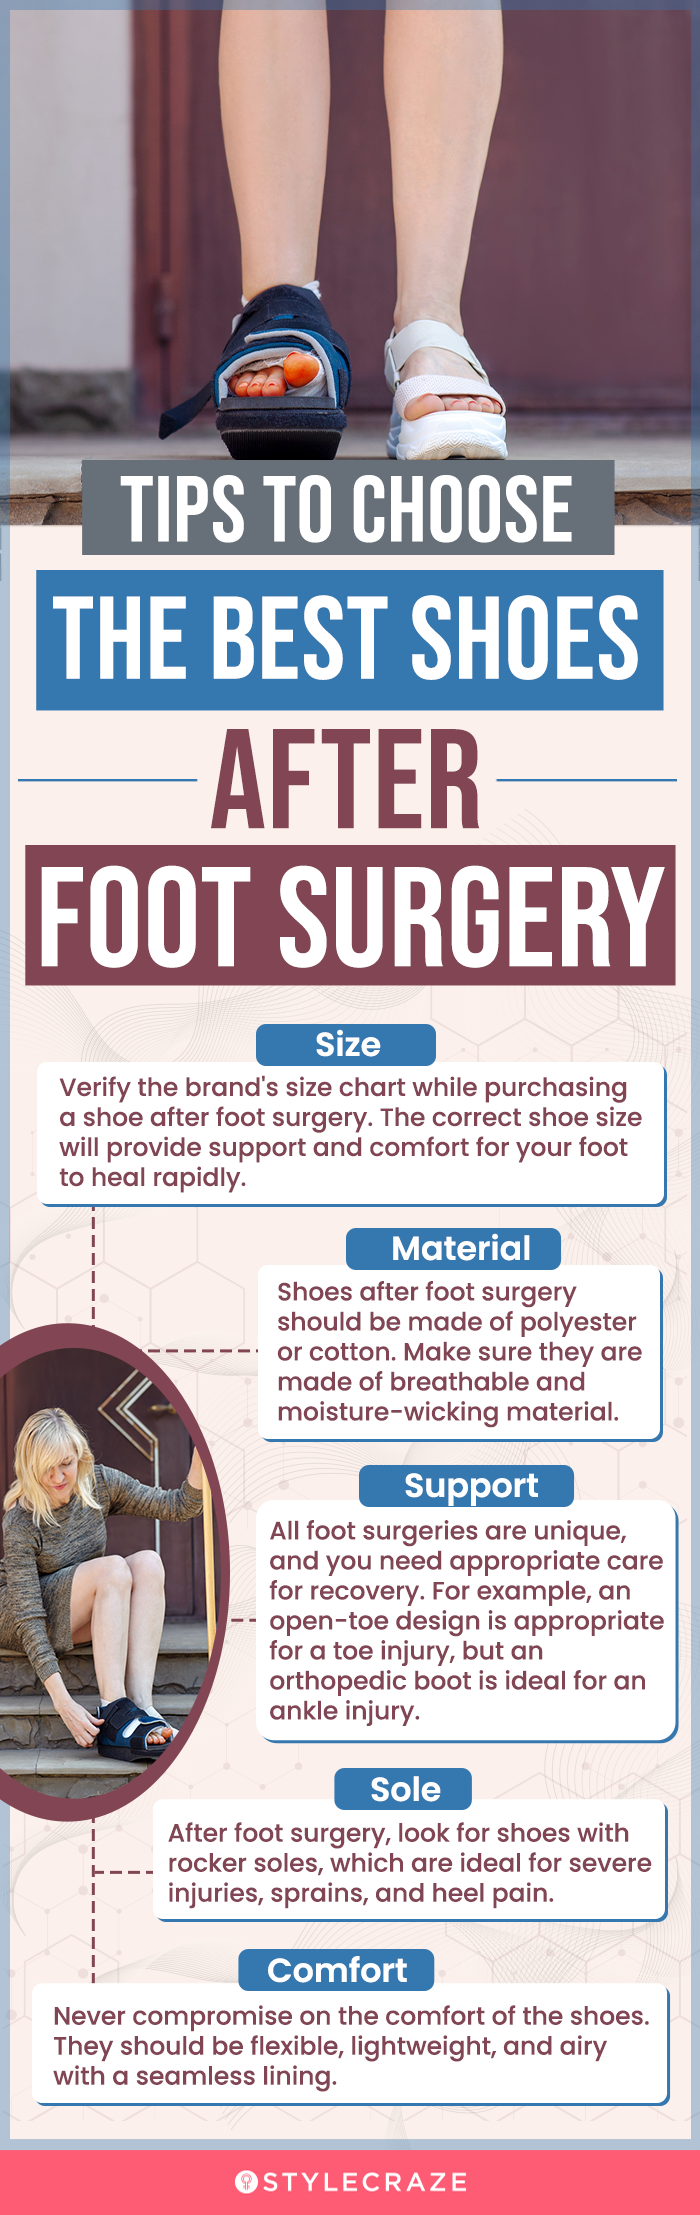 Tips To Choose The Best Shoes After Foot Surgery (infographic)